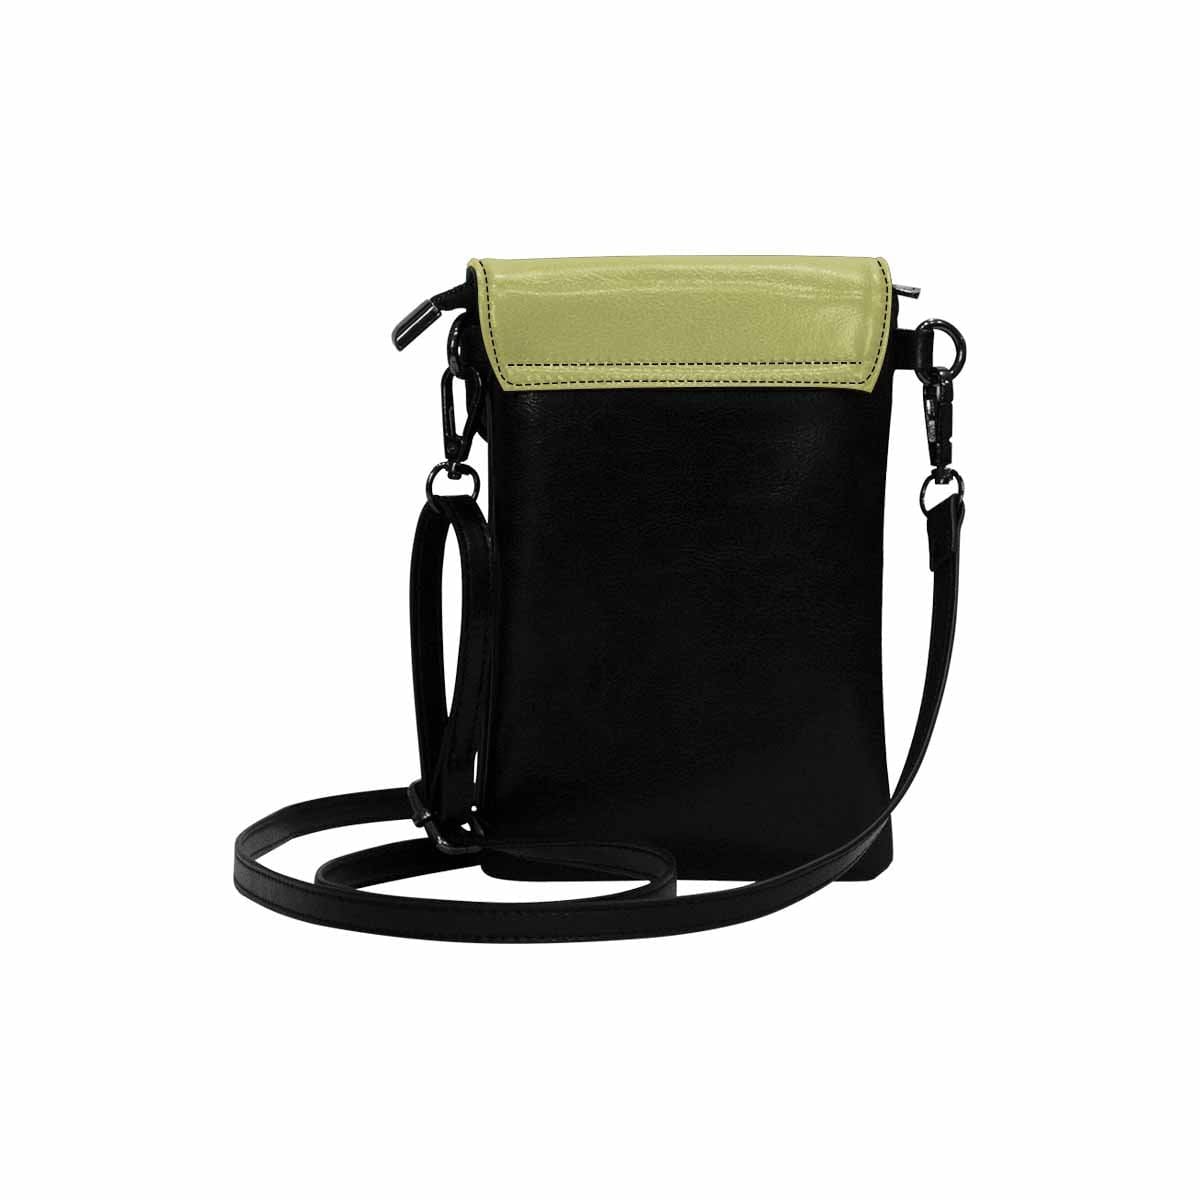 Womens Cell Phone Purse Olive Green - Bags | Wallets | Phone Cases